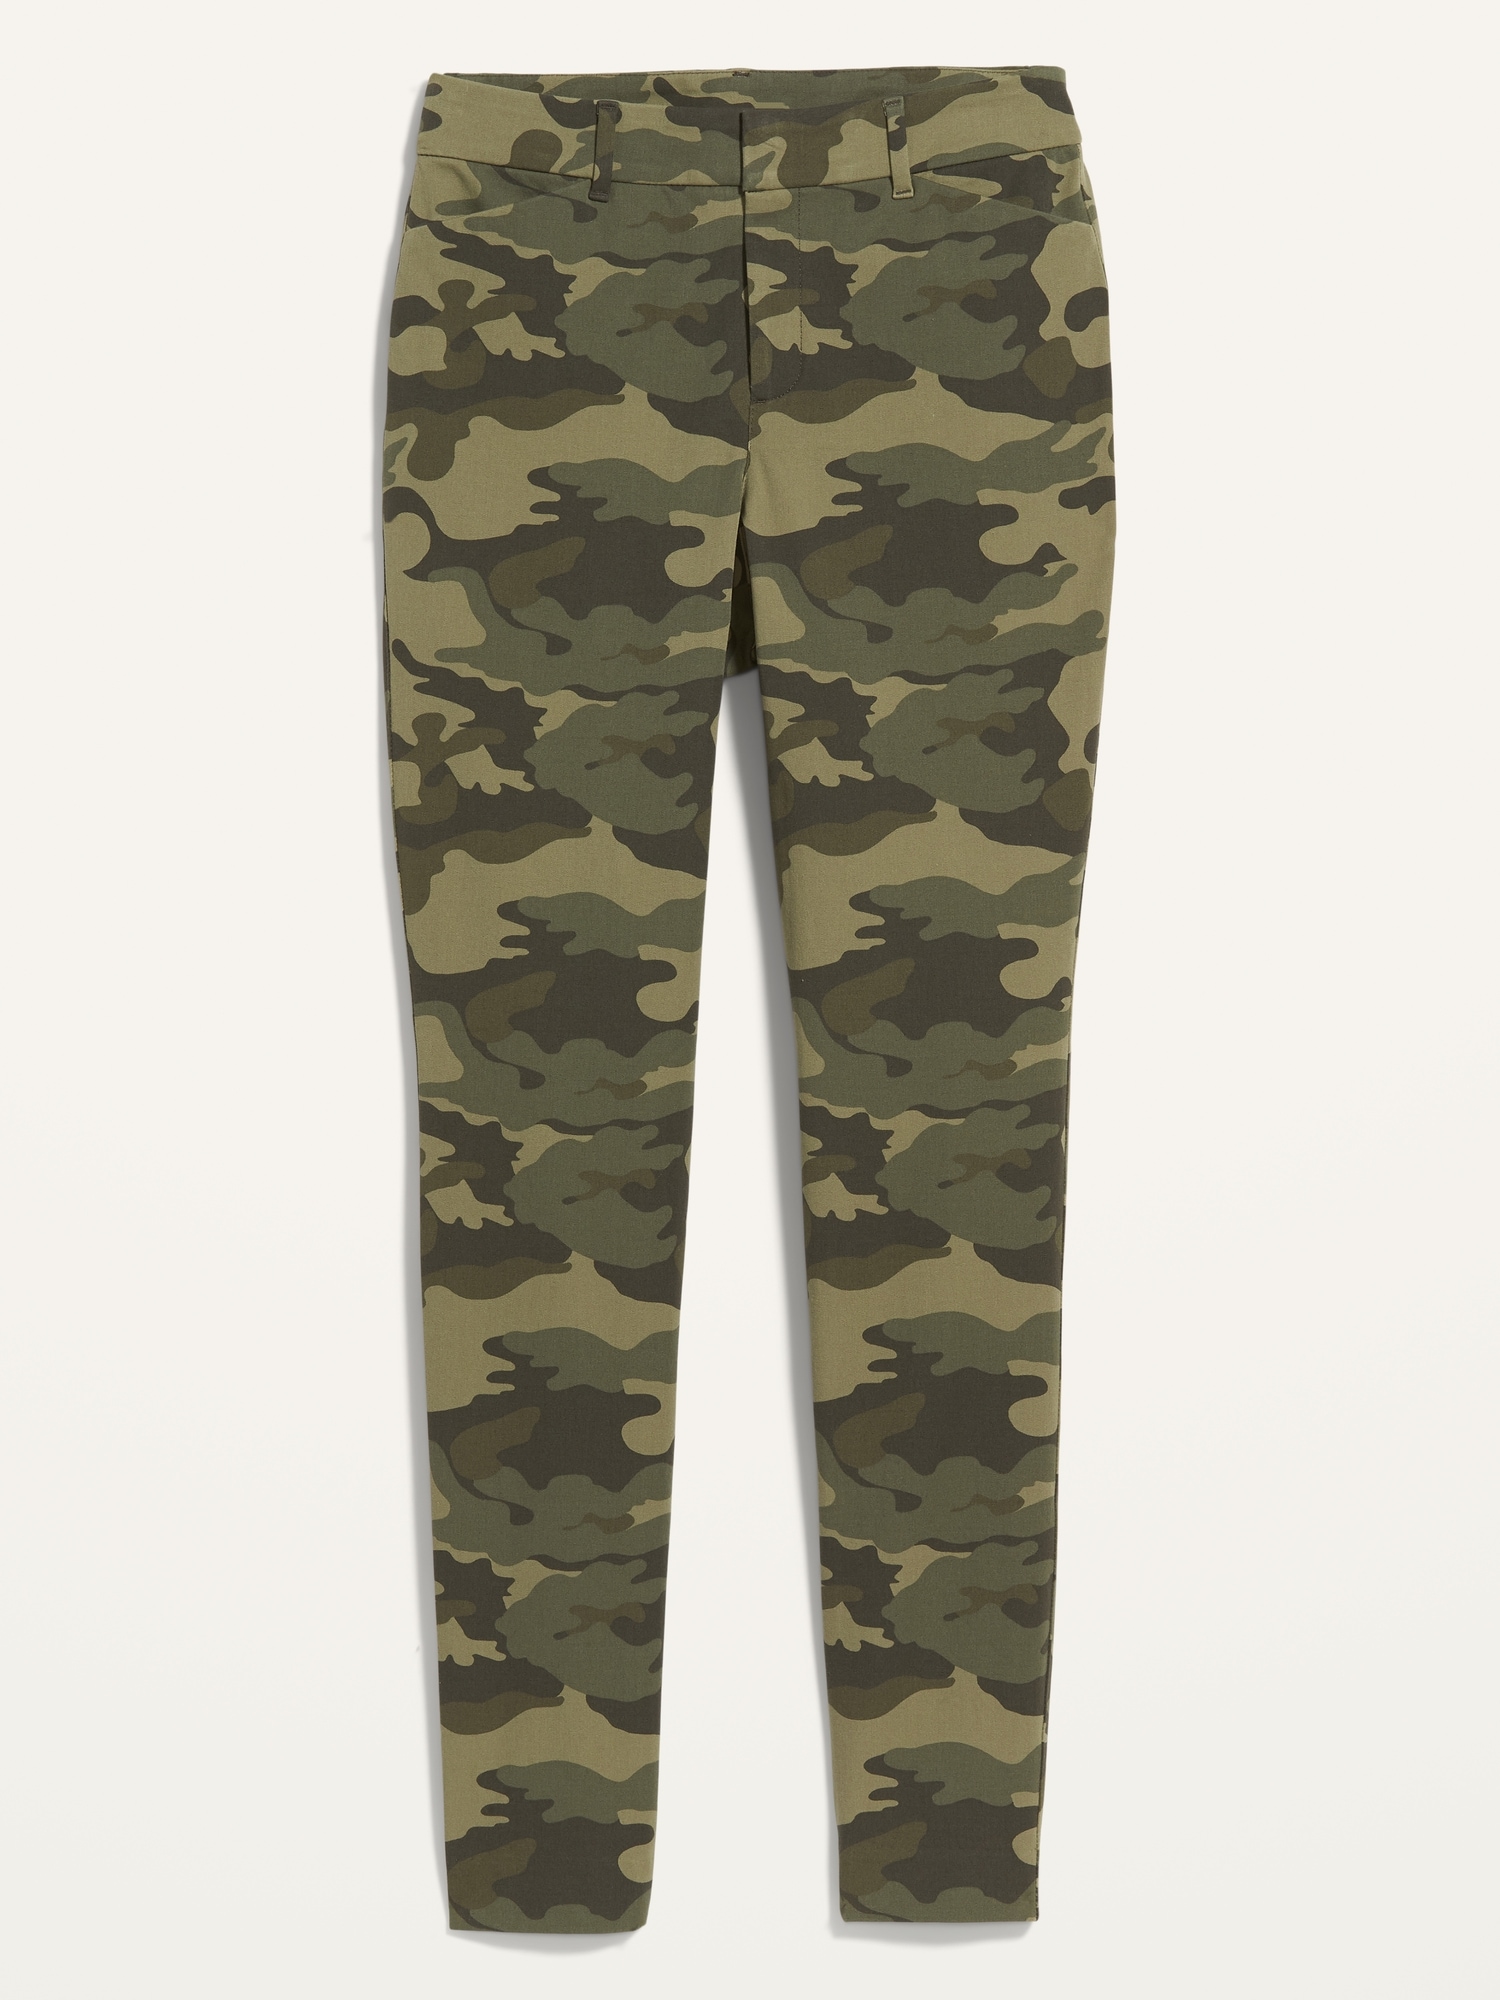 High-Waisted Camo Pixie Skinny Pants for Women